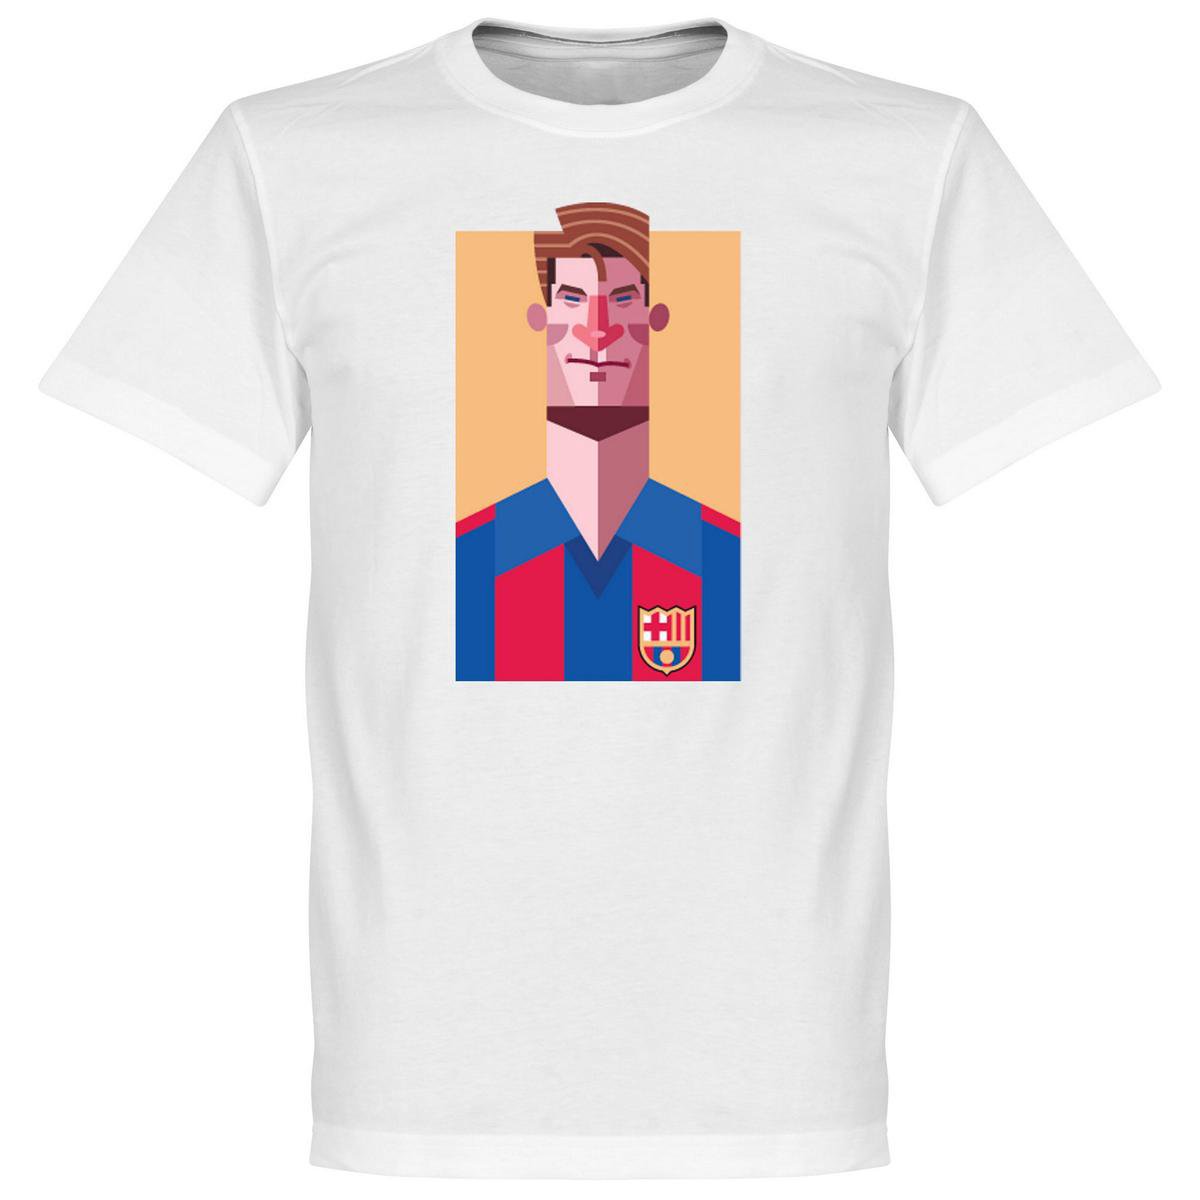 Playmaker Laudrup Football T-shirt - S